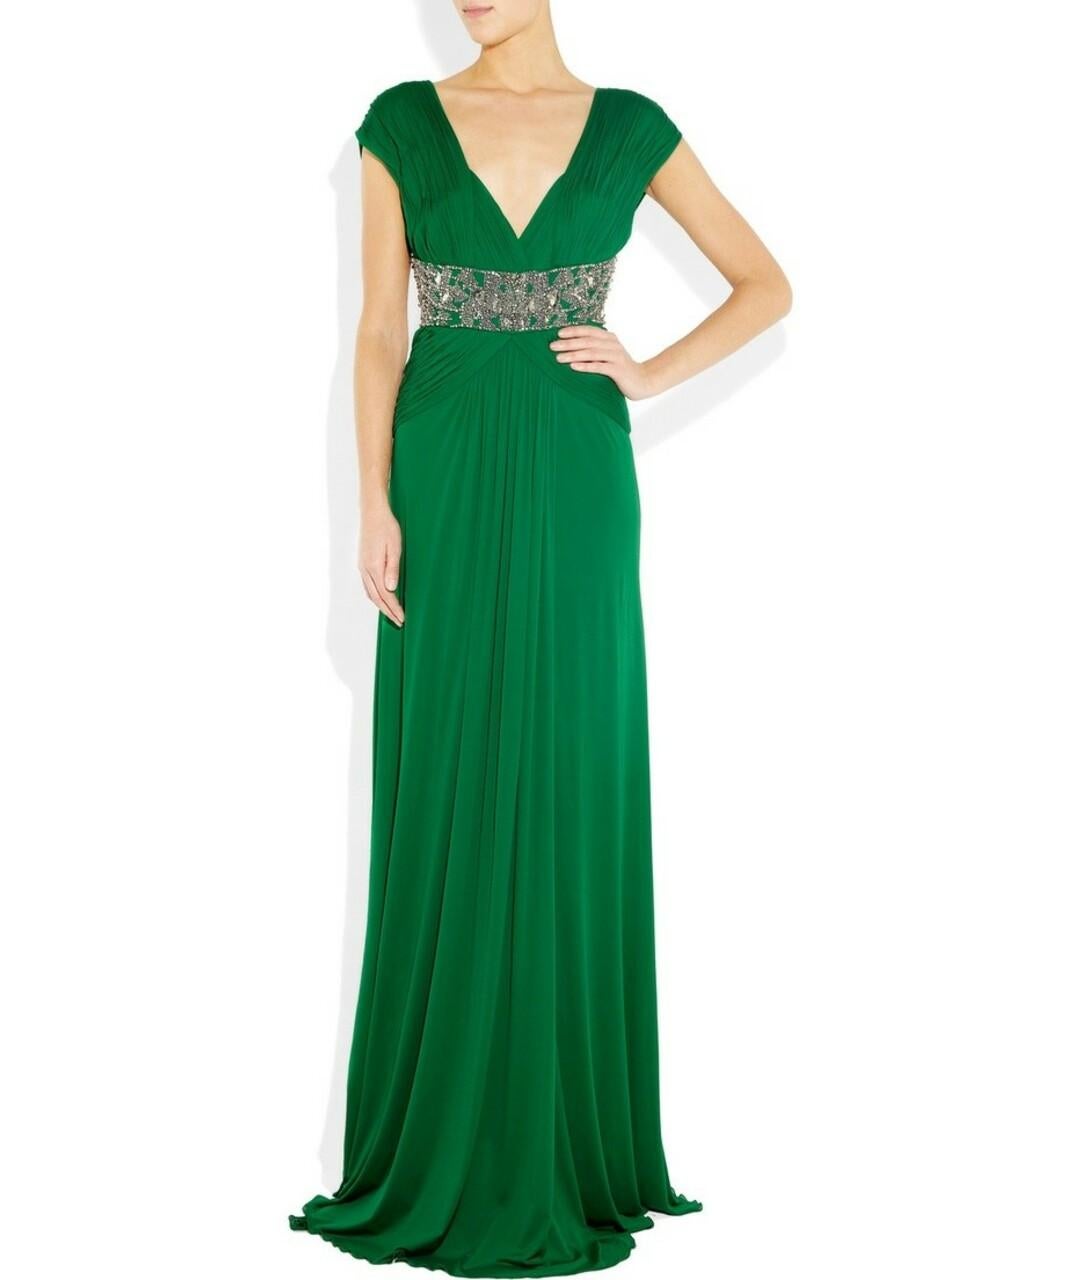 ROBERTO CAVALLI

GREEN GOWN DRESS DECORATED with STONES

Deep V-Neck
Short sleeves
Back zipper closure

Size EU 38 

Made in Italy

Pre owned in excellent condition
 100% authentic guarantee 

       PLEASE VISIT OUR STORE FOR MORE GREAT ITEMS 



os